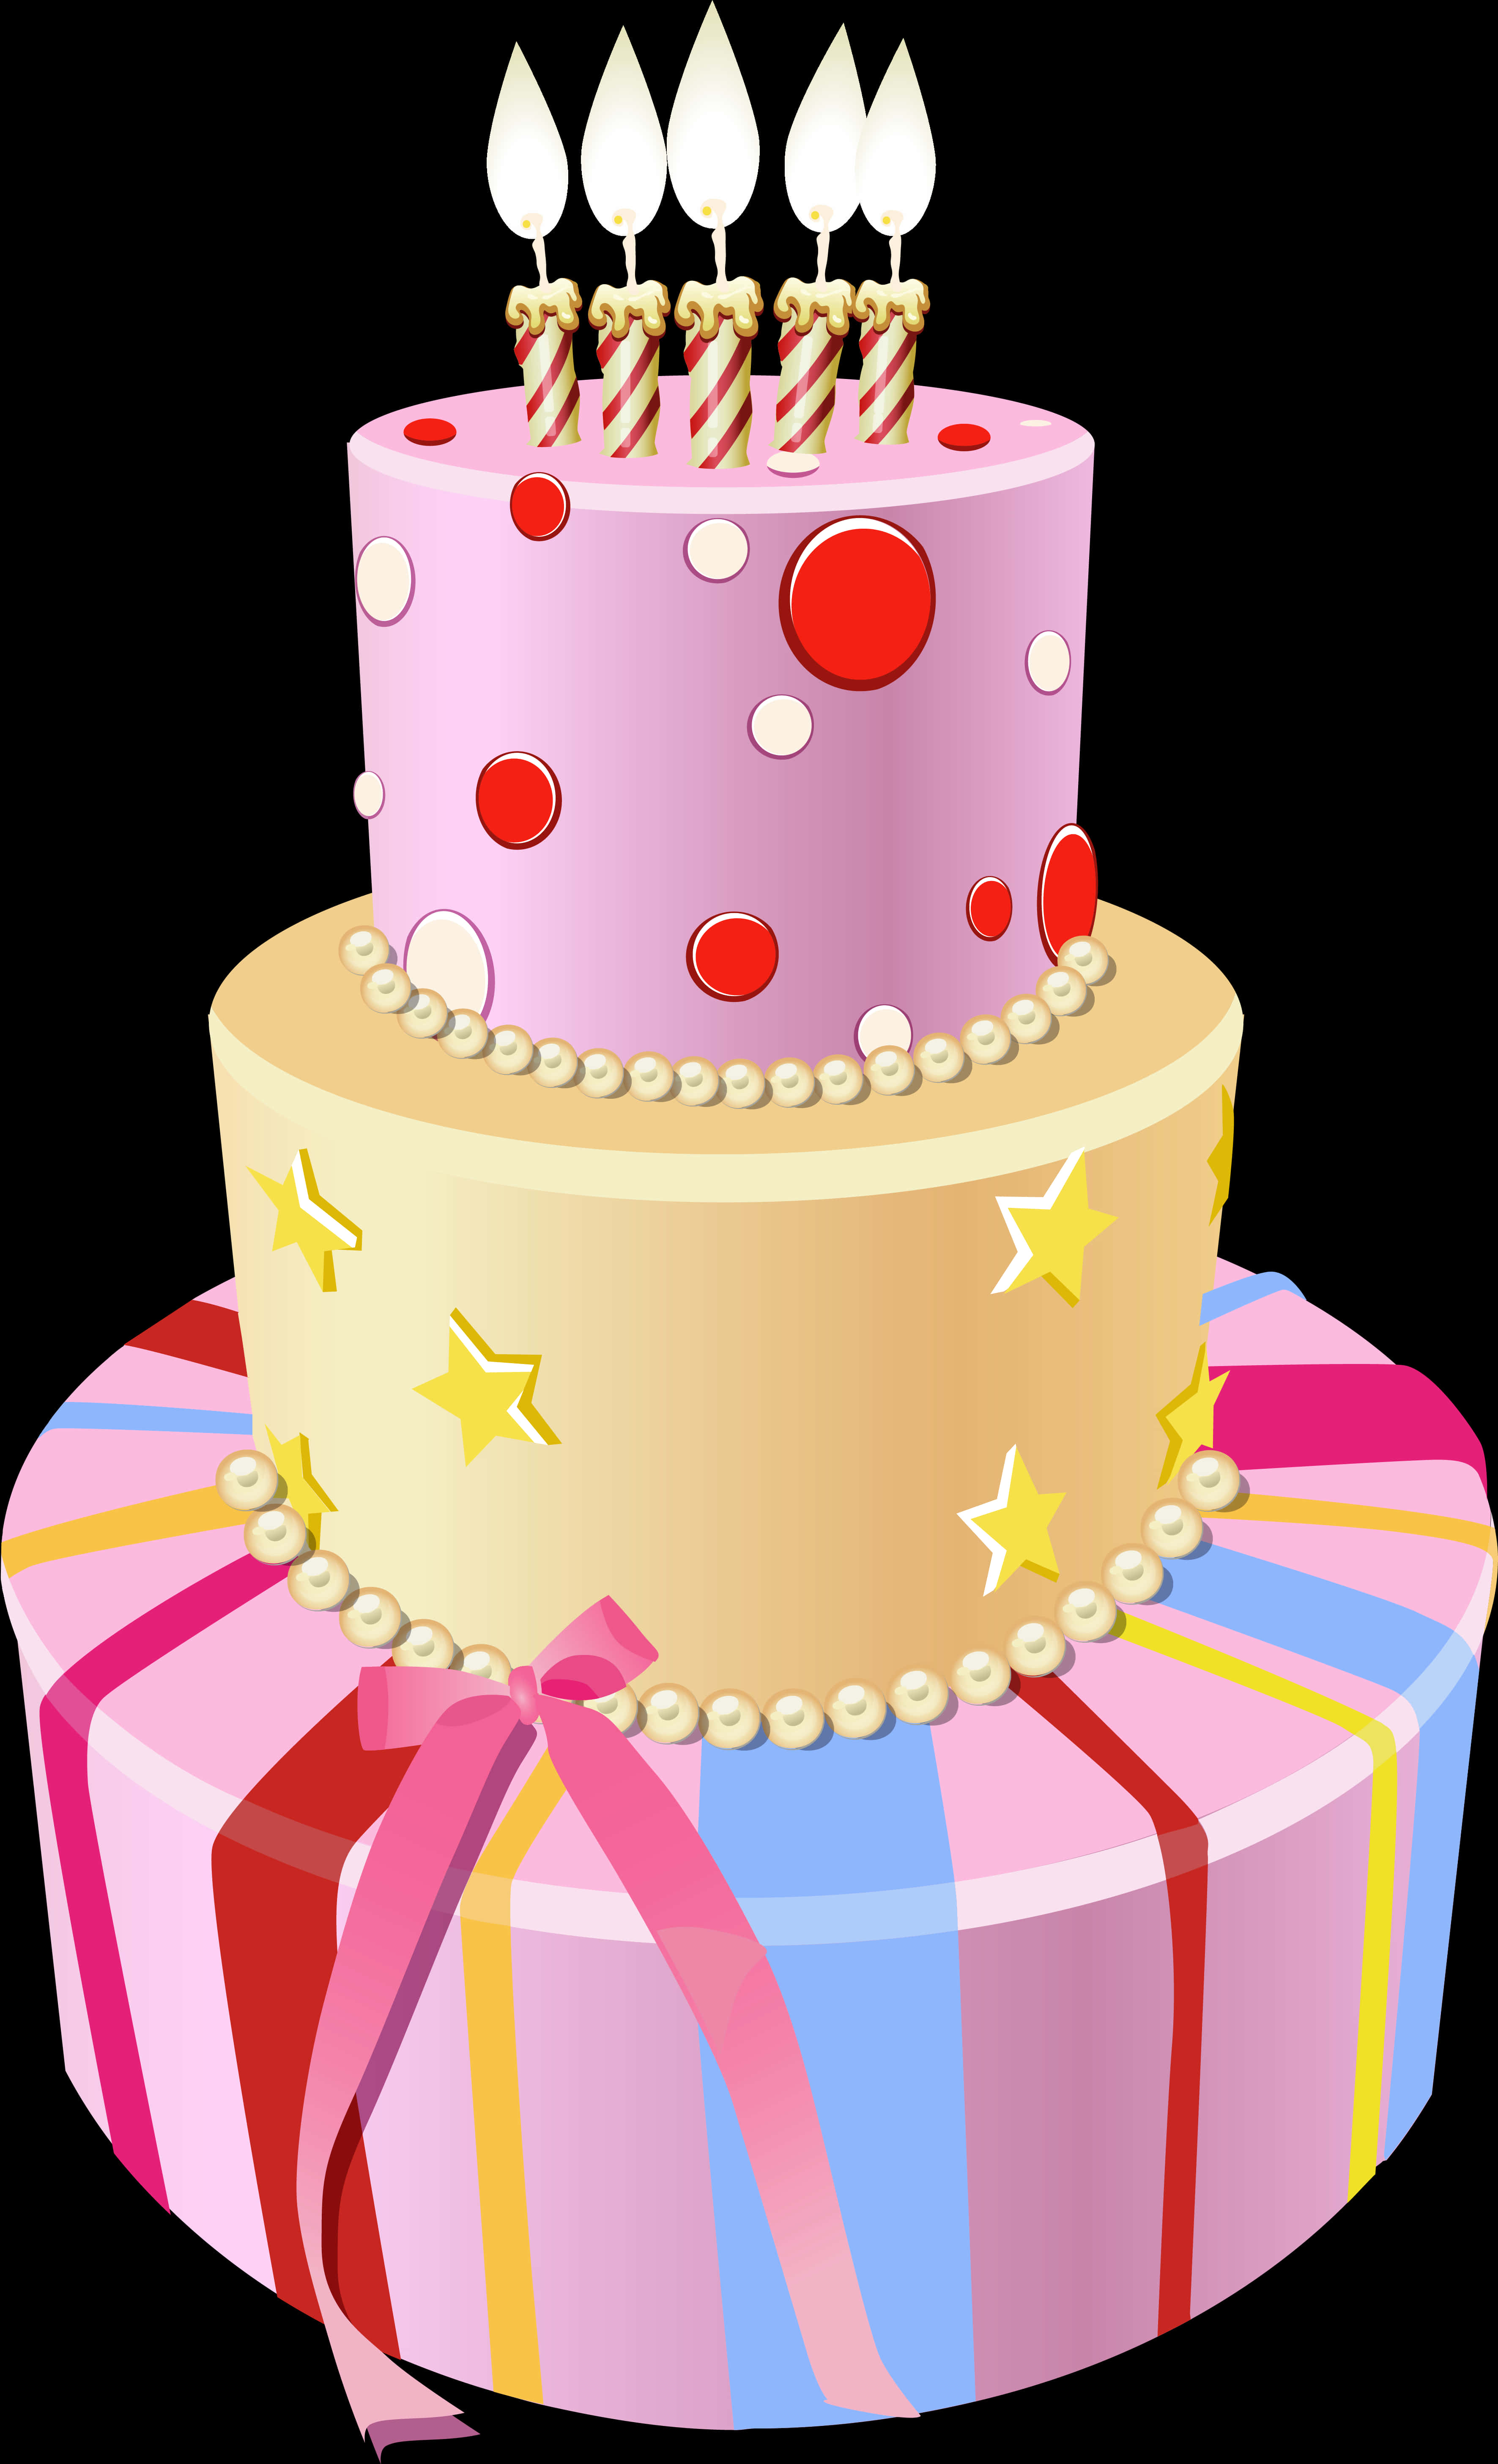 Colorful Tiered Birthday Cake Illustration PNG image